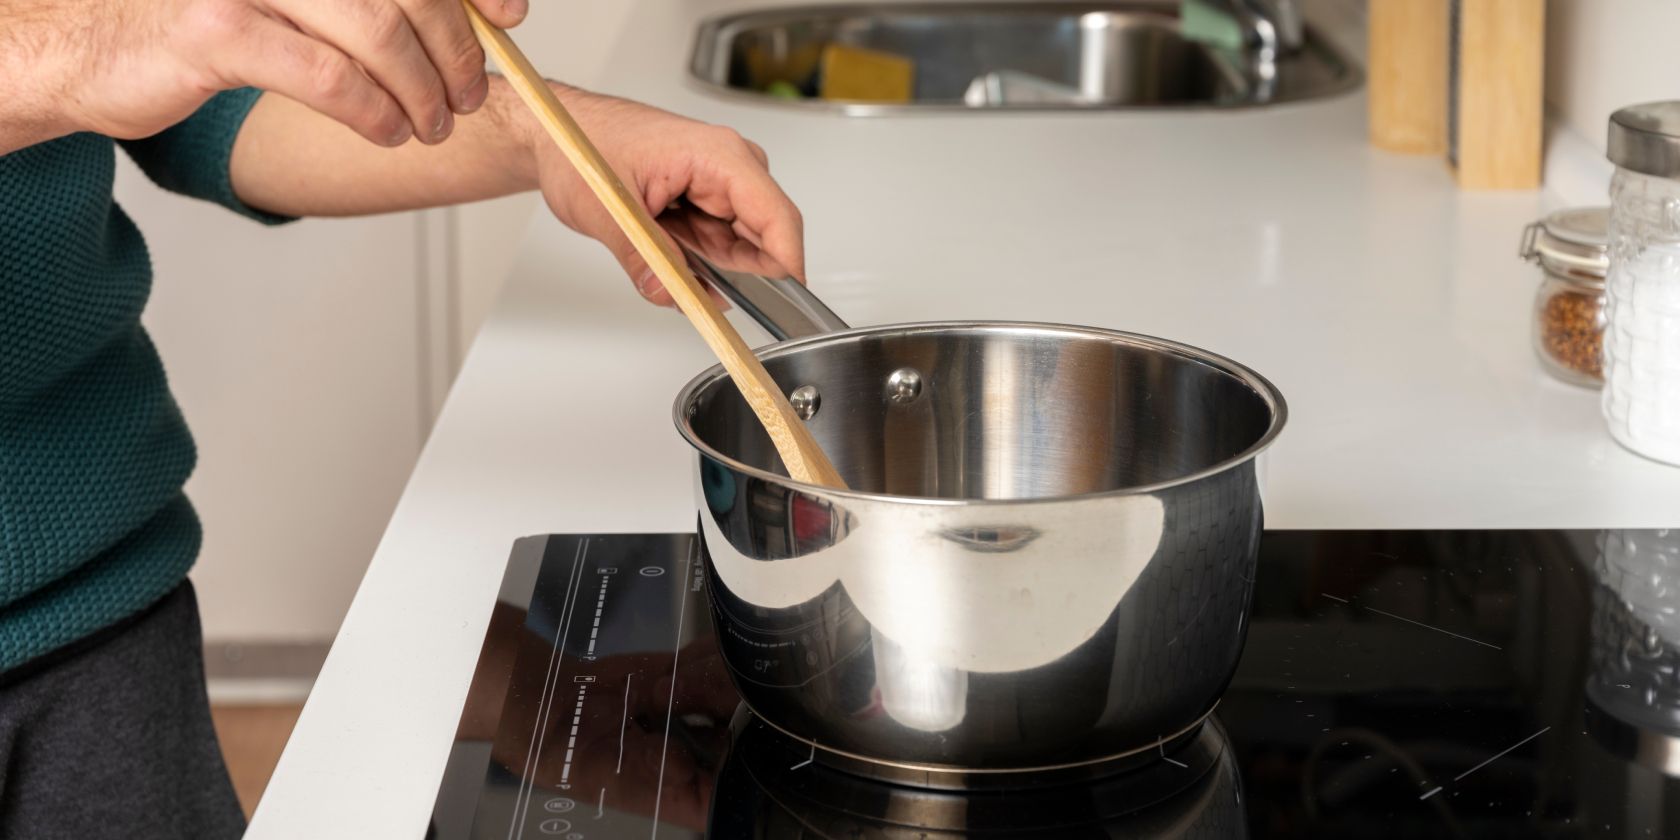  SAKI Automatic Pot Stirrer for Cooking, with 2 speeds